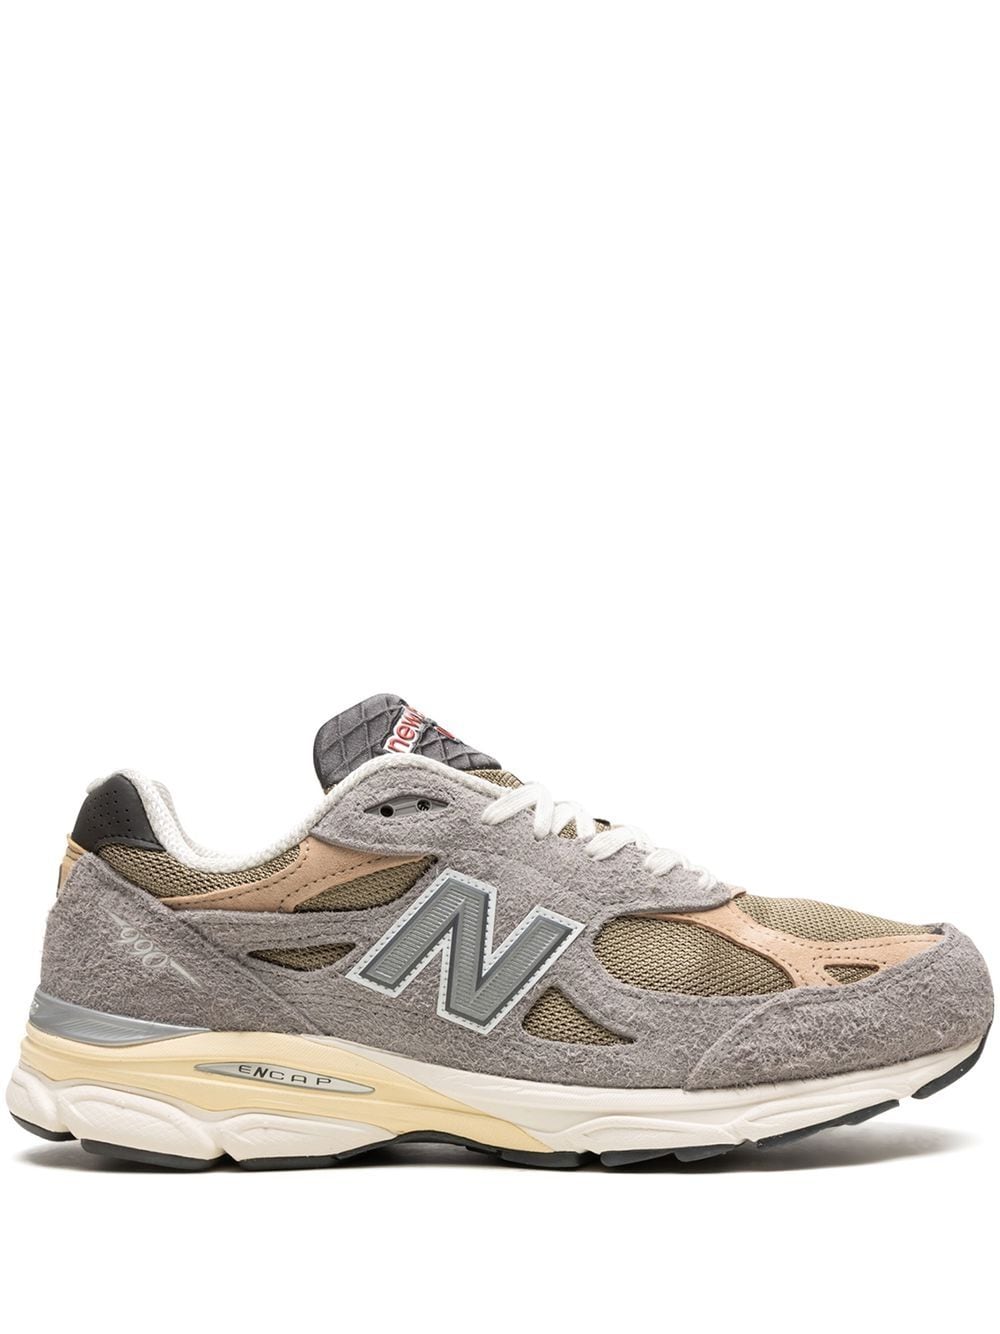 New Balance Made in USA 990v3 sneakers - Grijs